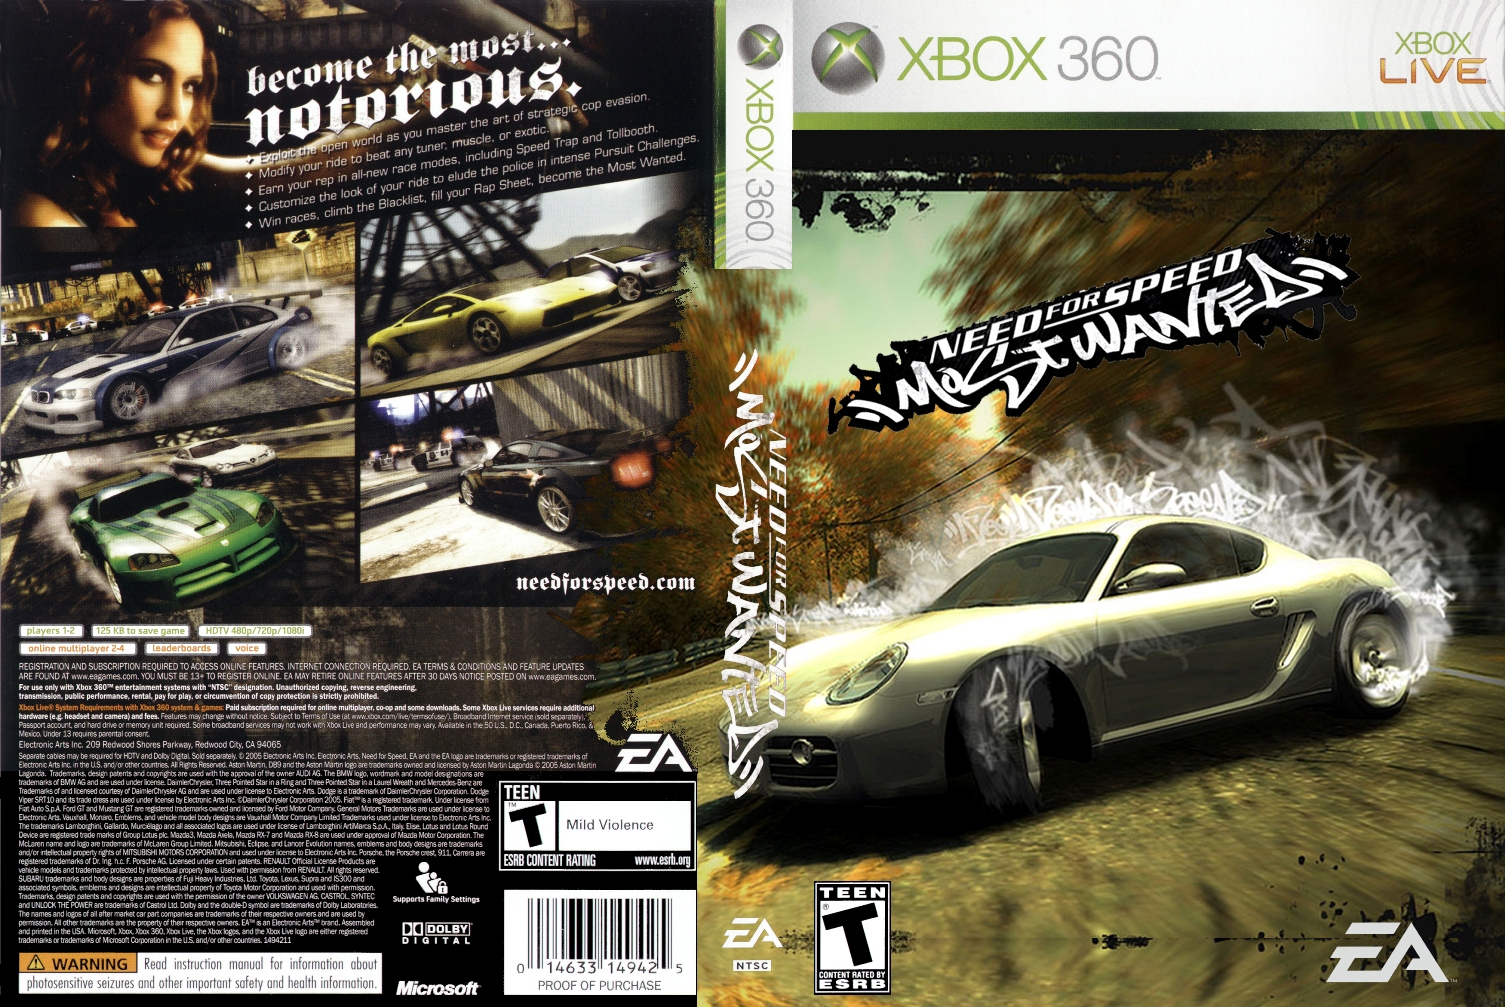 Nfs most wanted xbox. NFS MW 2005 Xbox 360. Xbox 360 most wanted Classic диск. Need for Speed most wanted Xbox 360 диск. Need for Speed most wanted Xbox 360 обложка.